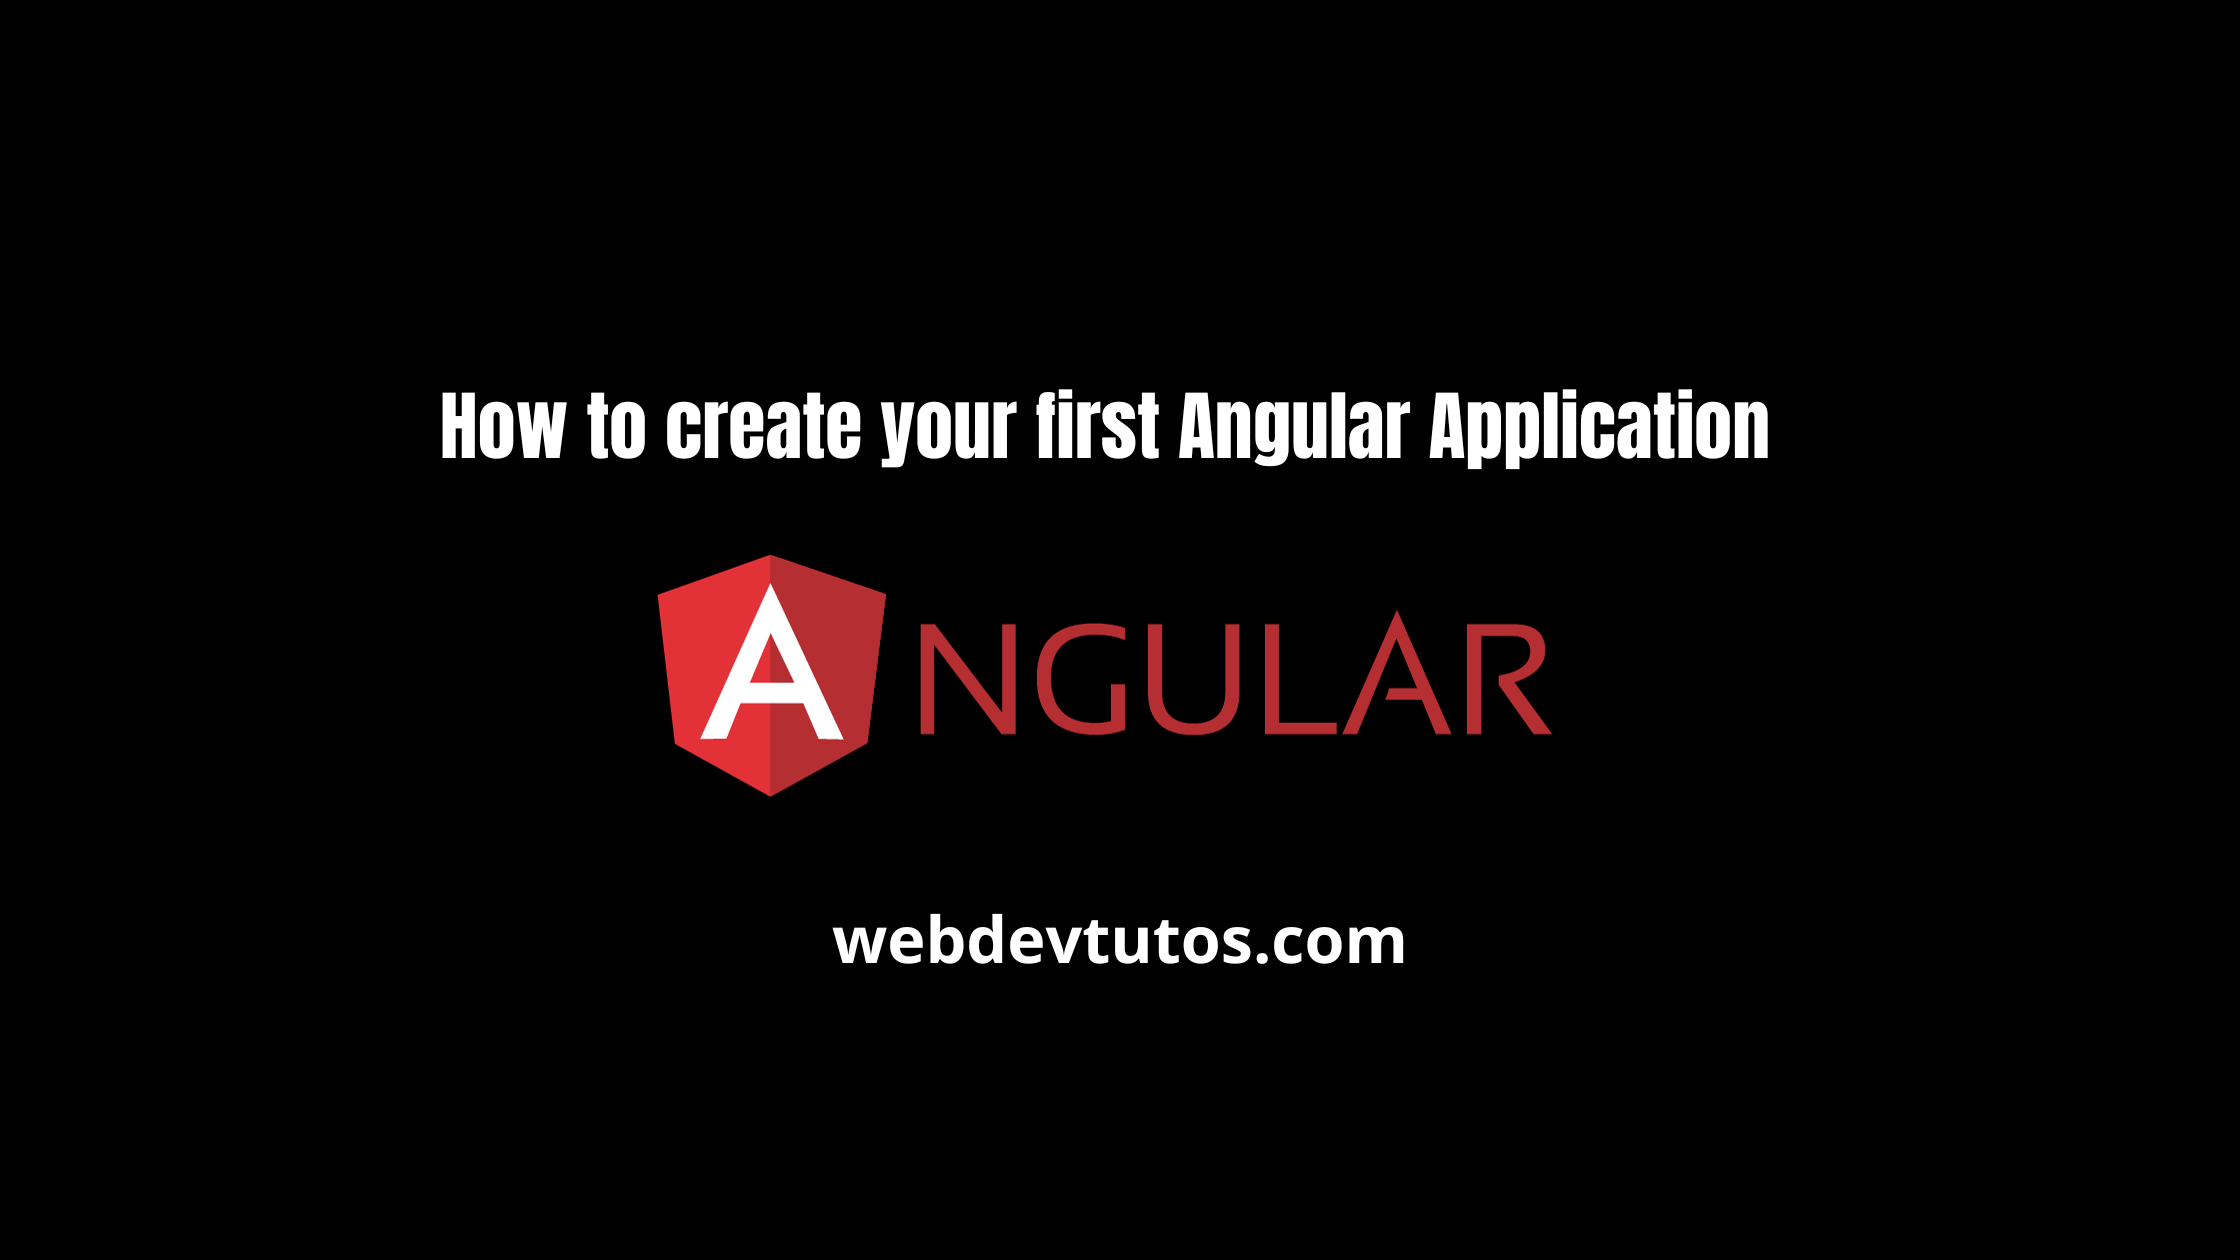 How To Create Your First Angular Application Webdevtutos 5212